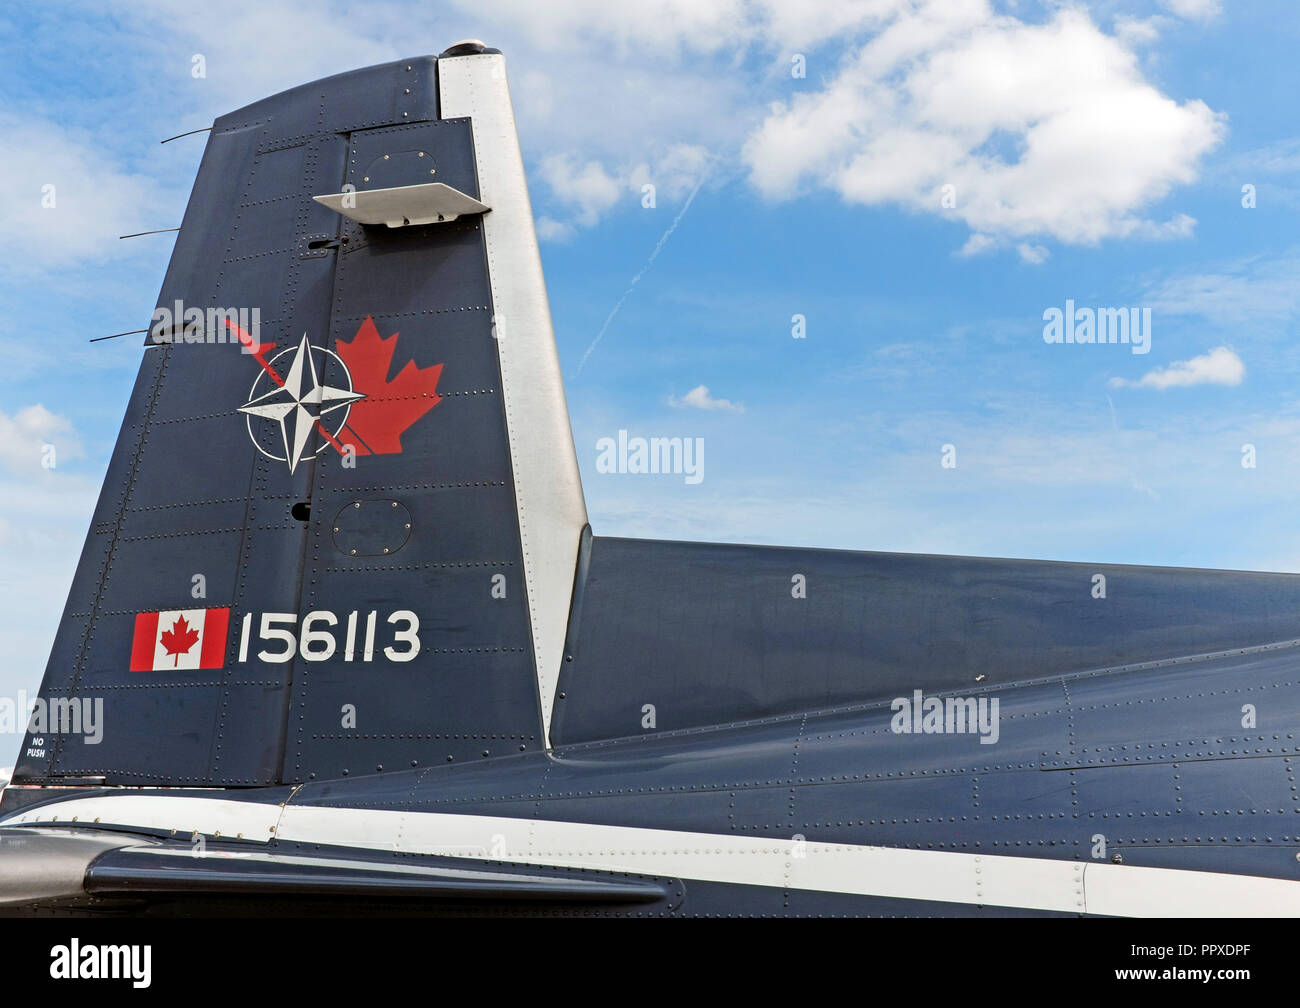 Royal Canadian Airforce fixed wing single engine turbo-prop plane by Raytheon on display at the 2018 Cleveland Air Show in Cleveland, Ohio, USA. Stock Photo